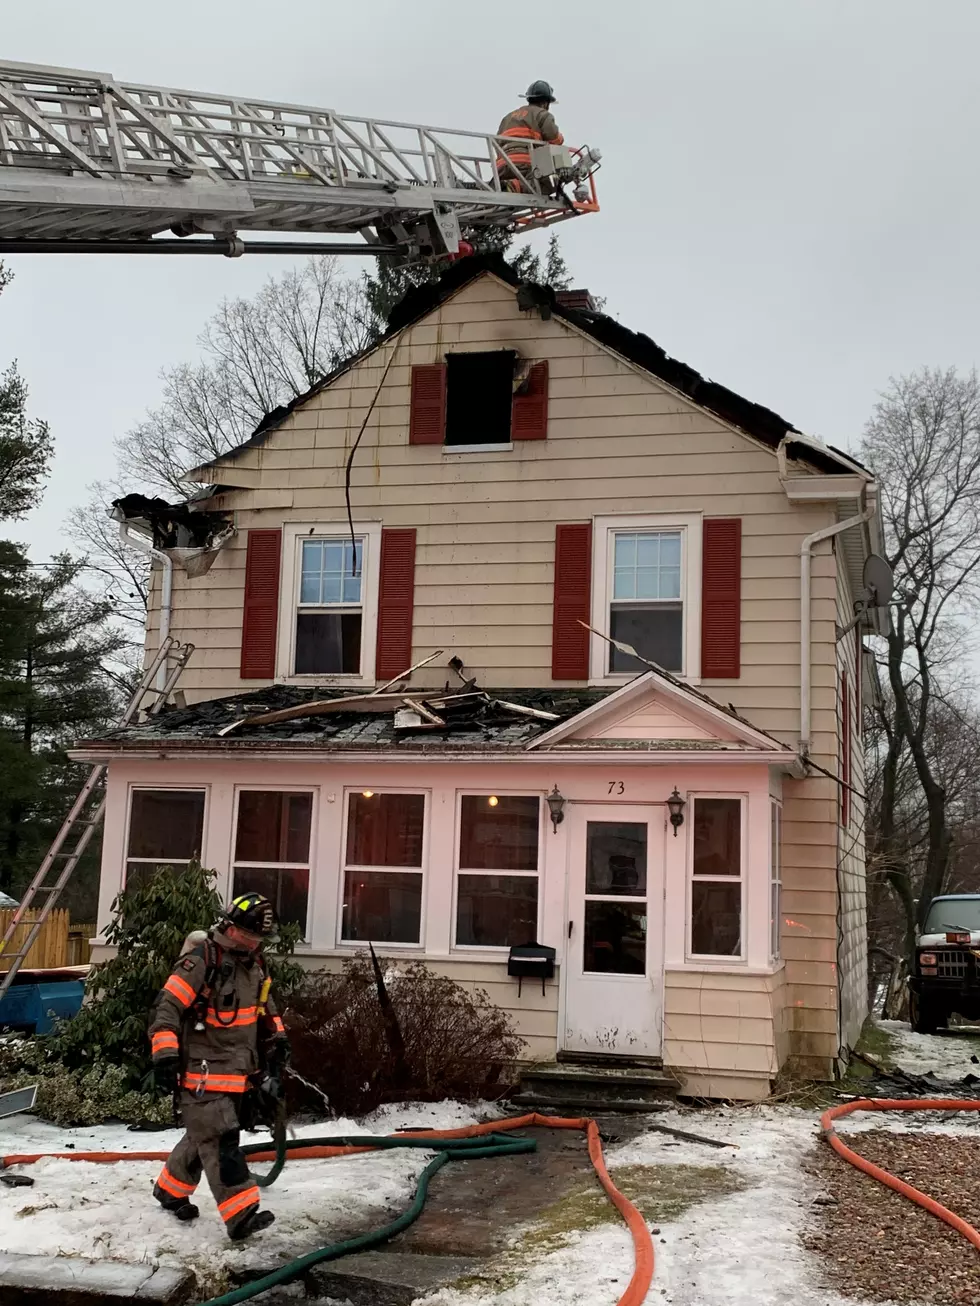 TWO FIRES OVER 12 HOURS IN PITTSFIELD